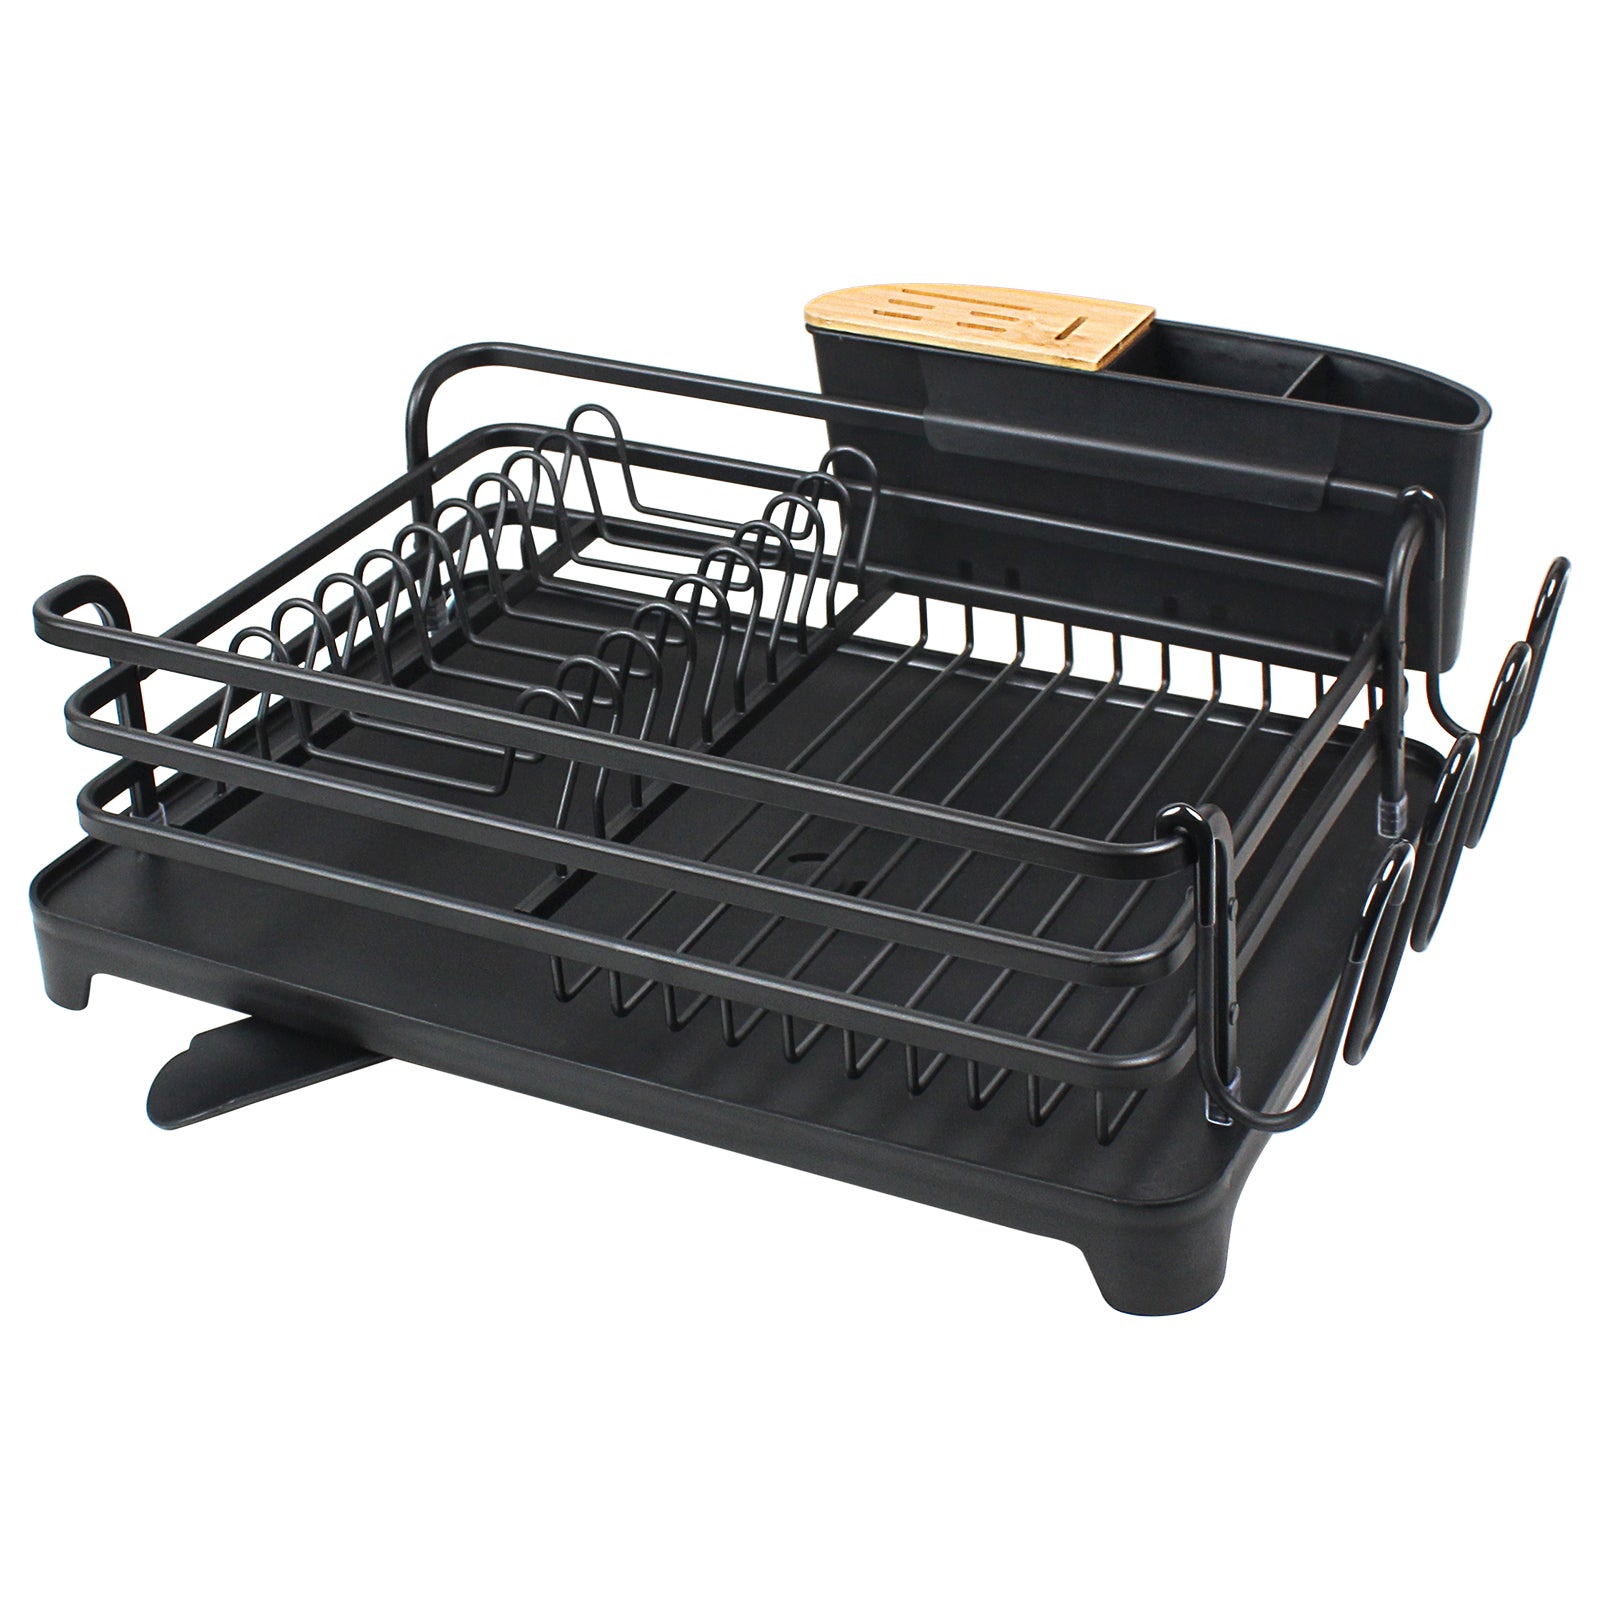  bukfen Dish Drying Rack, Large Stainless Steel Over The Sink 2  Tier Dish Rack with Cover for Kitchen (Black, Middle 33.46 Length)